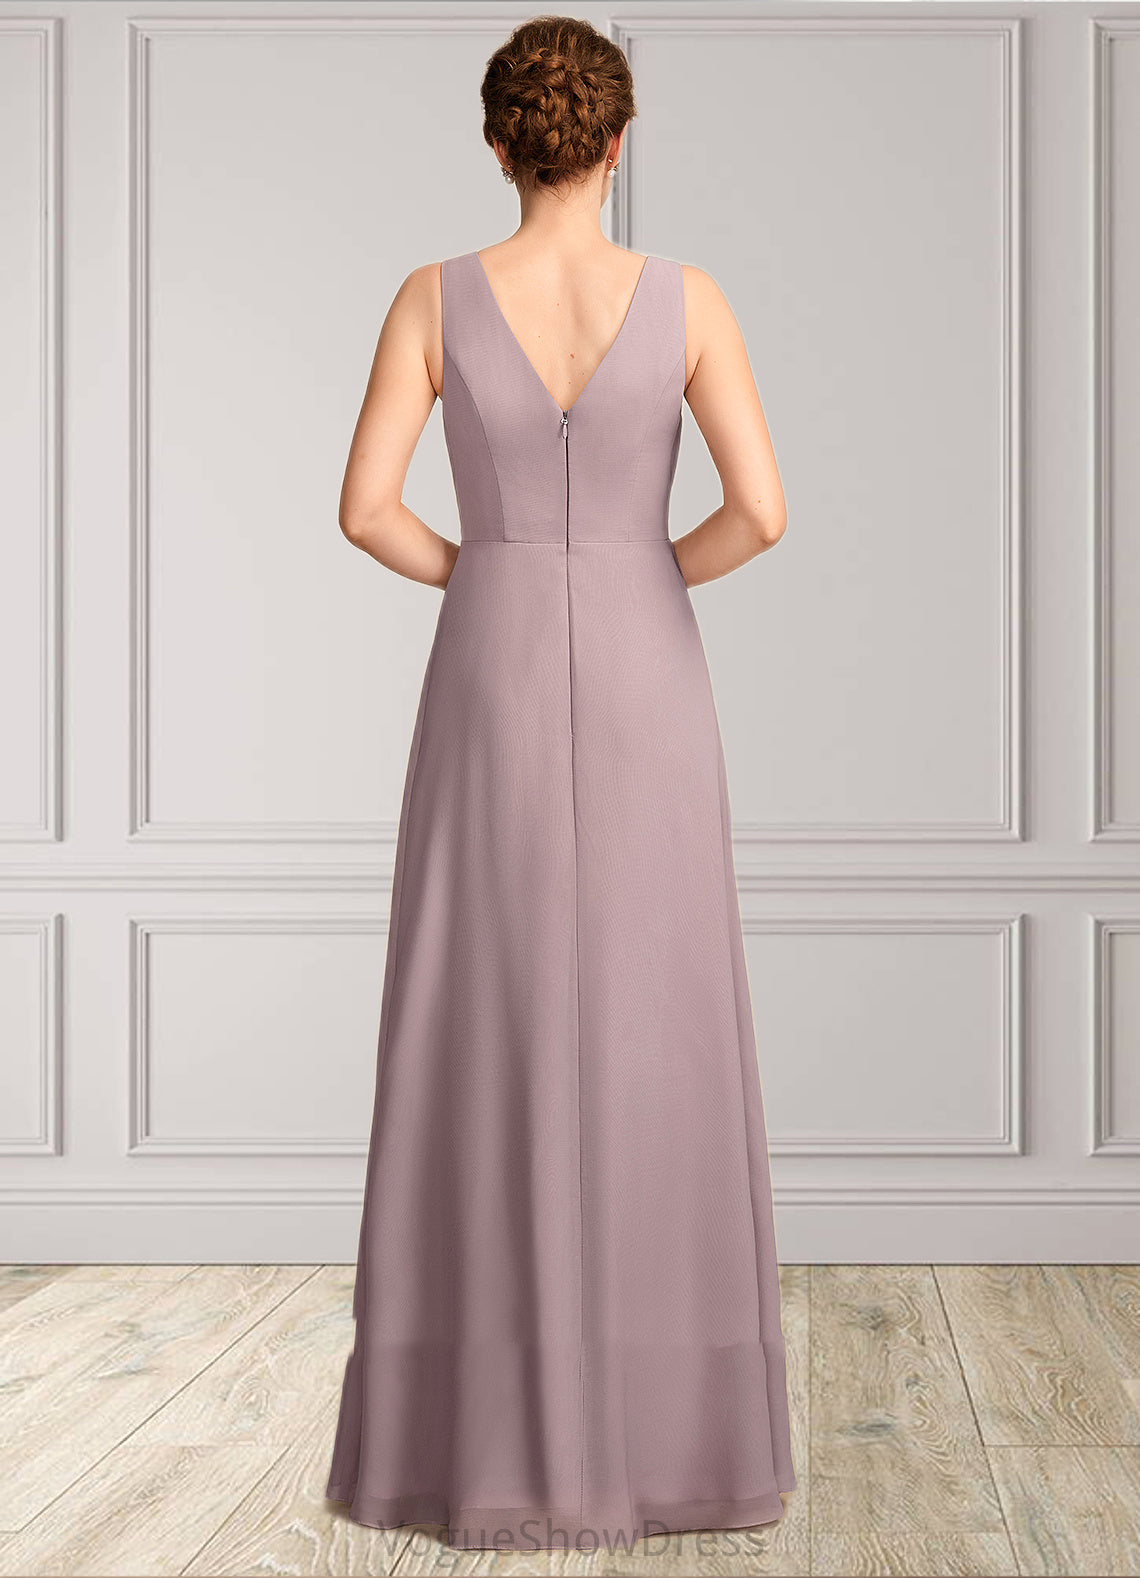 Lillian A-Line V-neck Floor-Length Chiffon Mother of the Bride Dress With Ruffle DL126P0015026